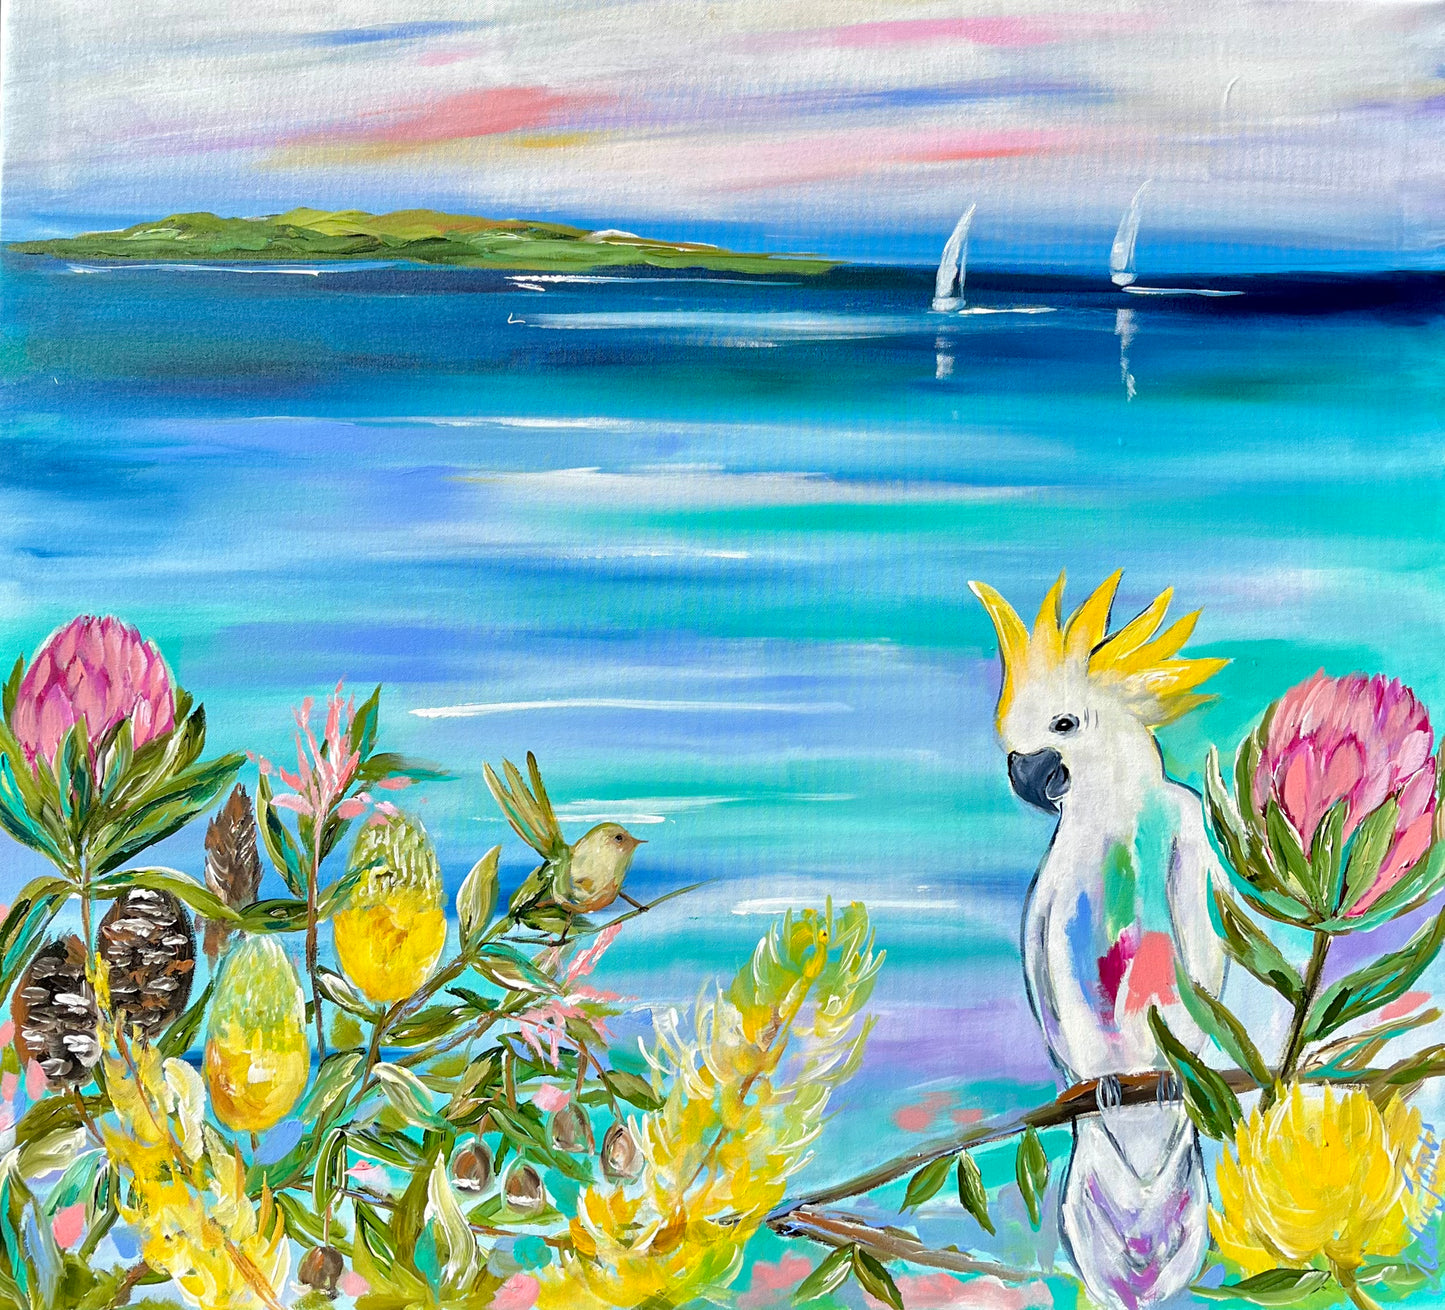 Cockatoo Cove - 1.1x1m - Original Artwork - Available by Commission